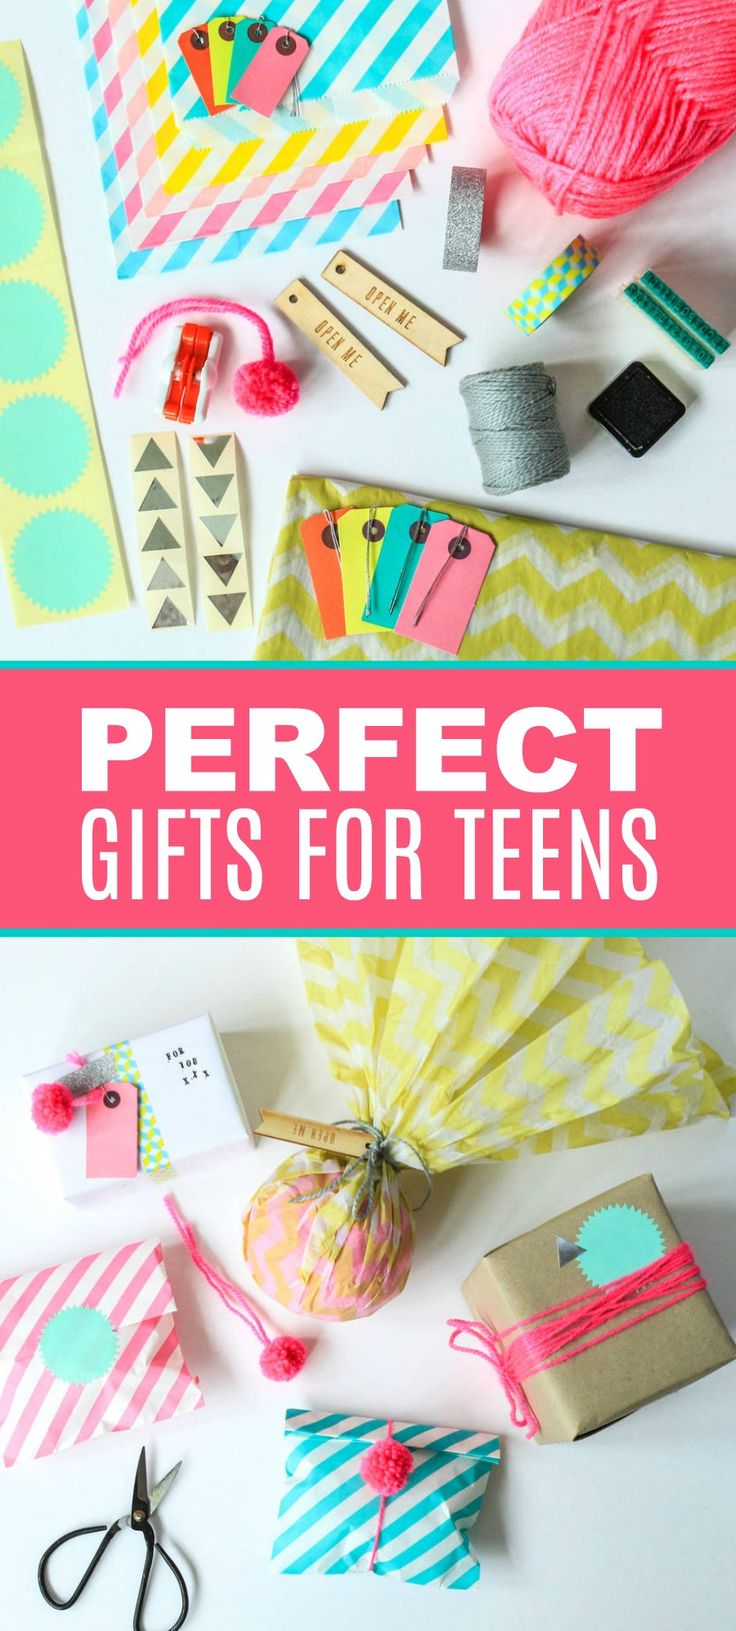 Whether it’s a birthday or Christmas, these are Perfect Gifts For Teens that ...